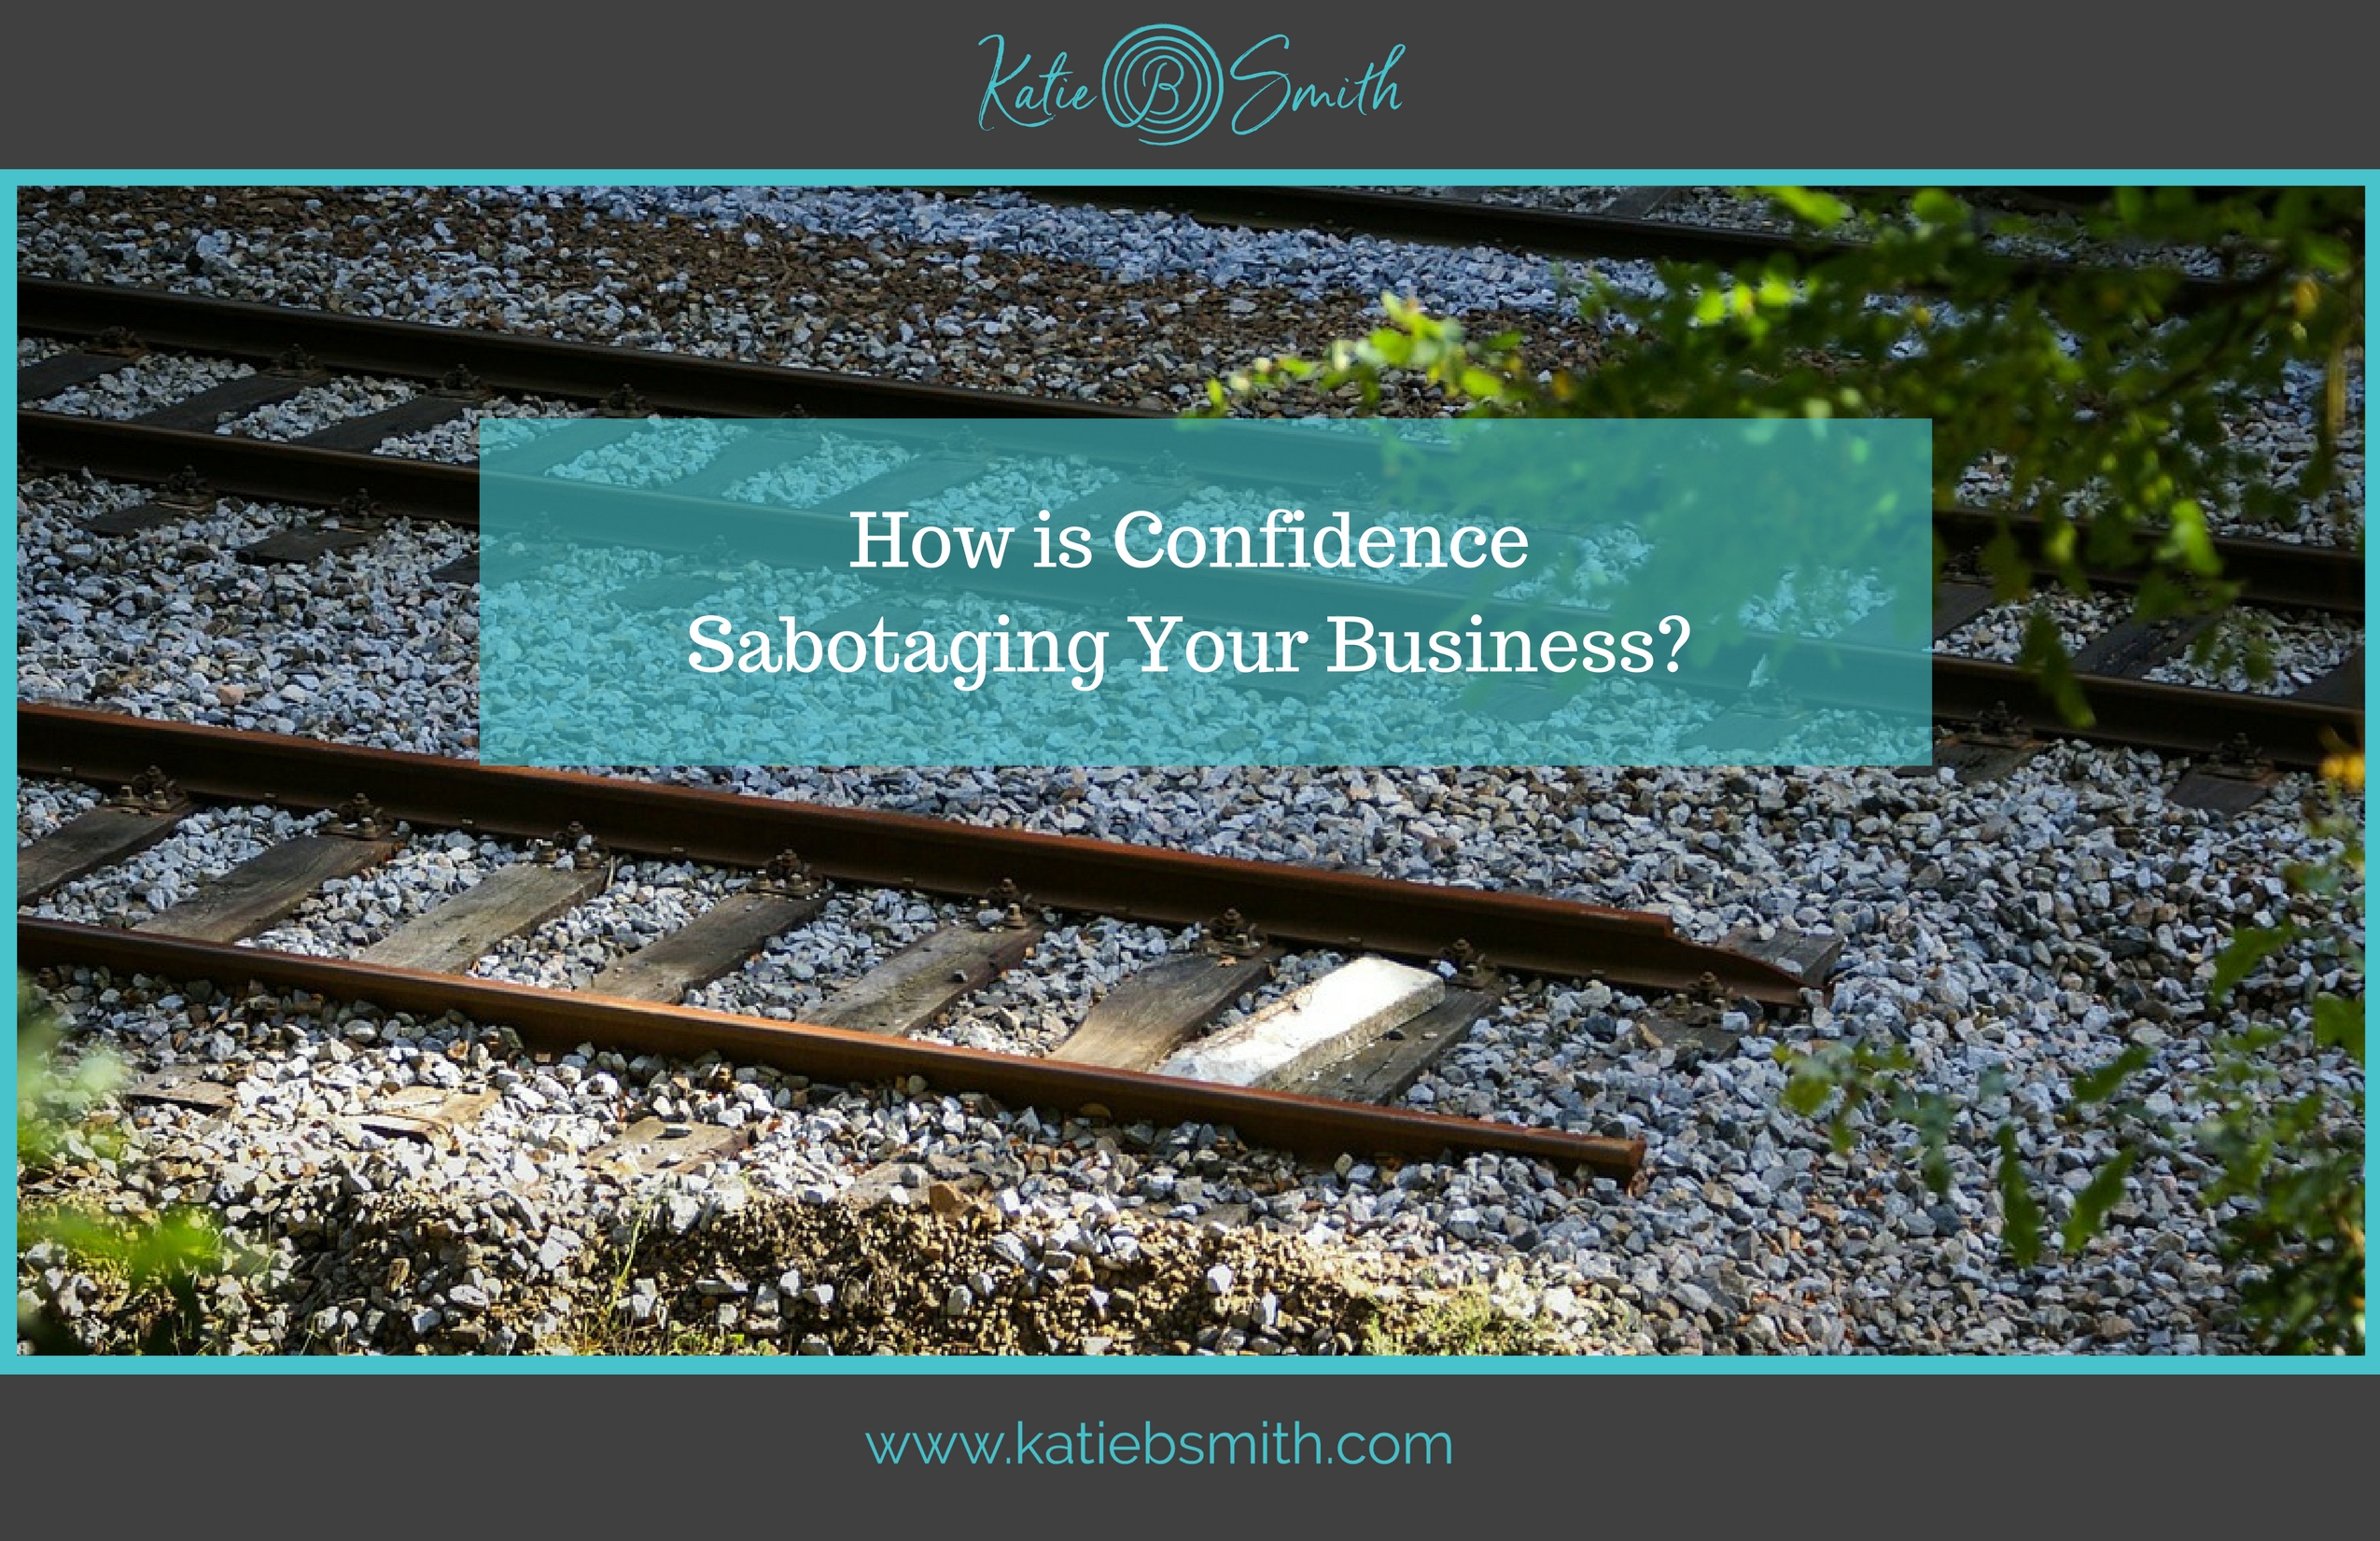 How is Confidence Sabotaging Your Business